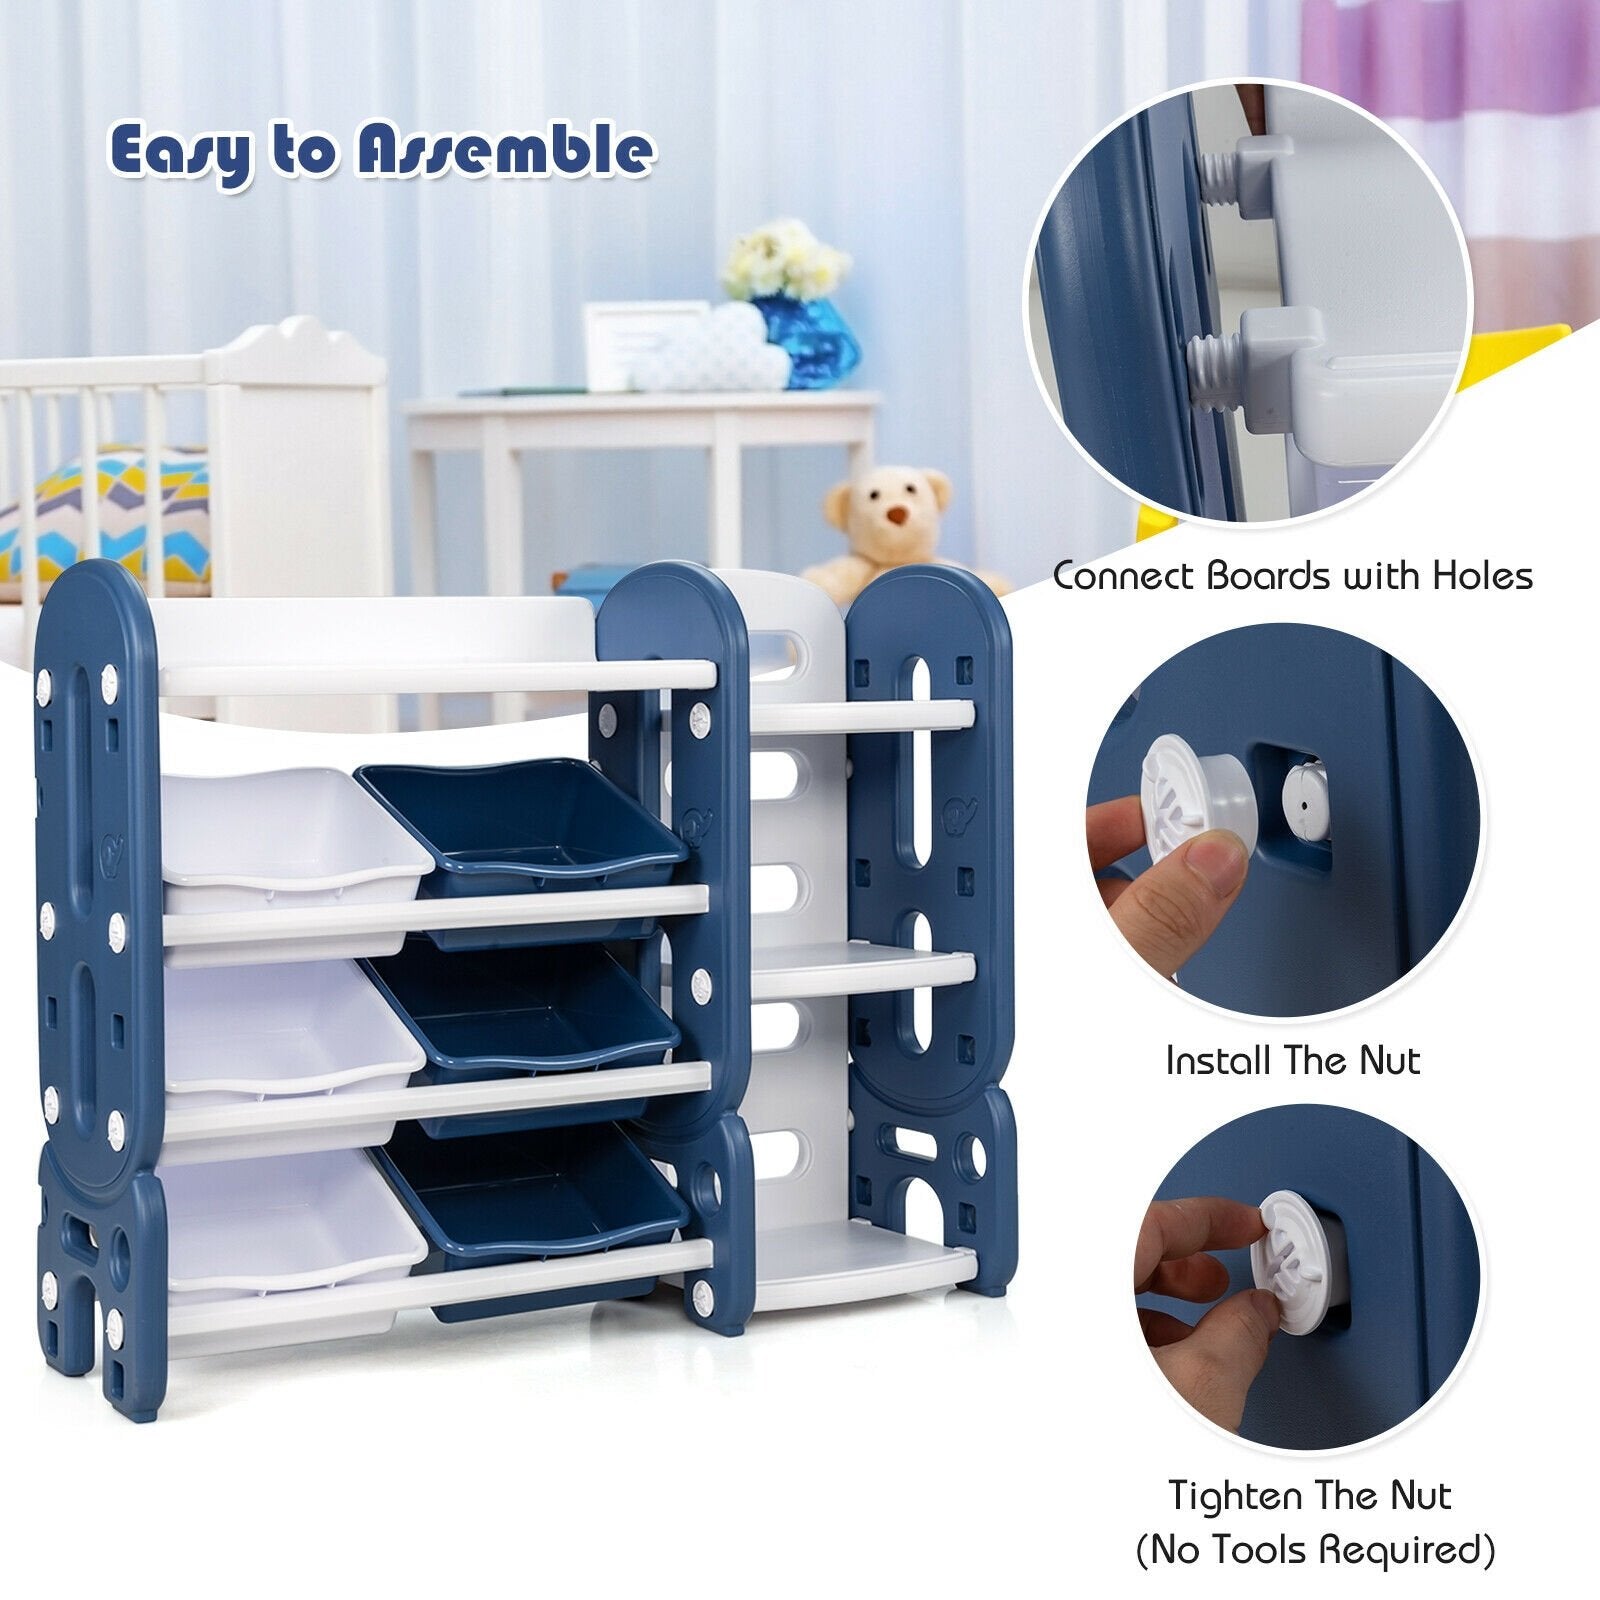 Kids Toy Storage Organizer with Bins and Multi-Layer Shelf for Bedroom Playroom, Blue at Gallery Canada